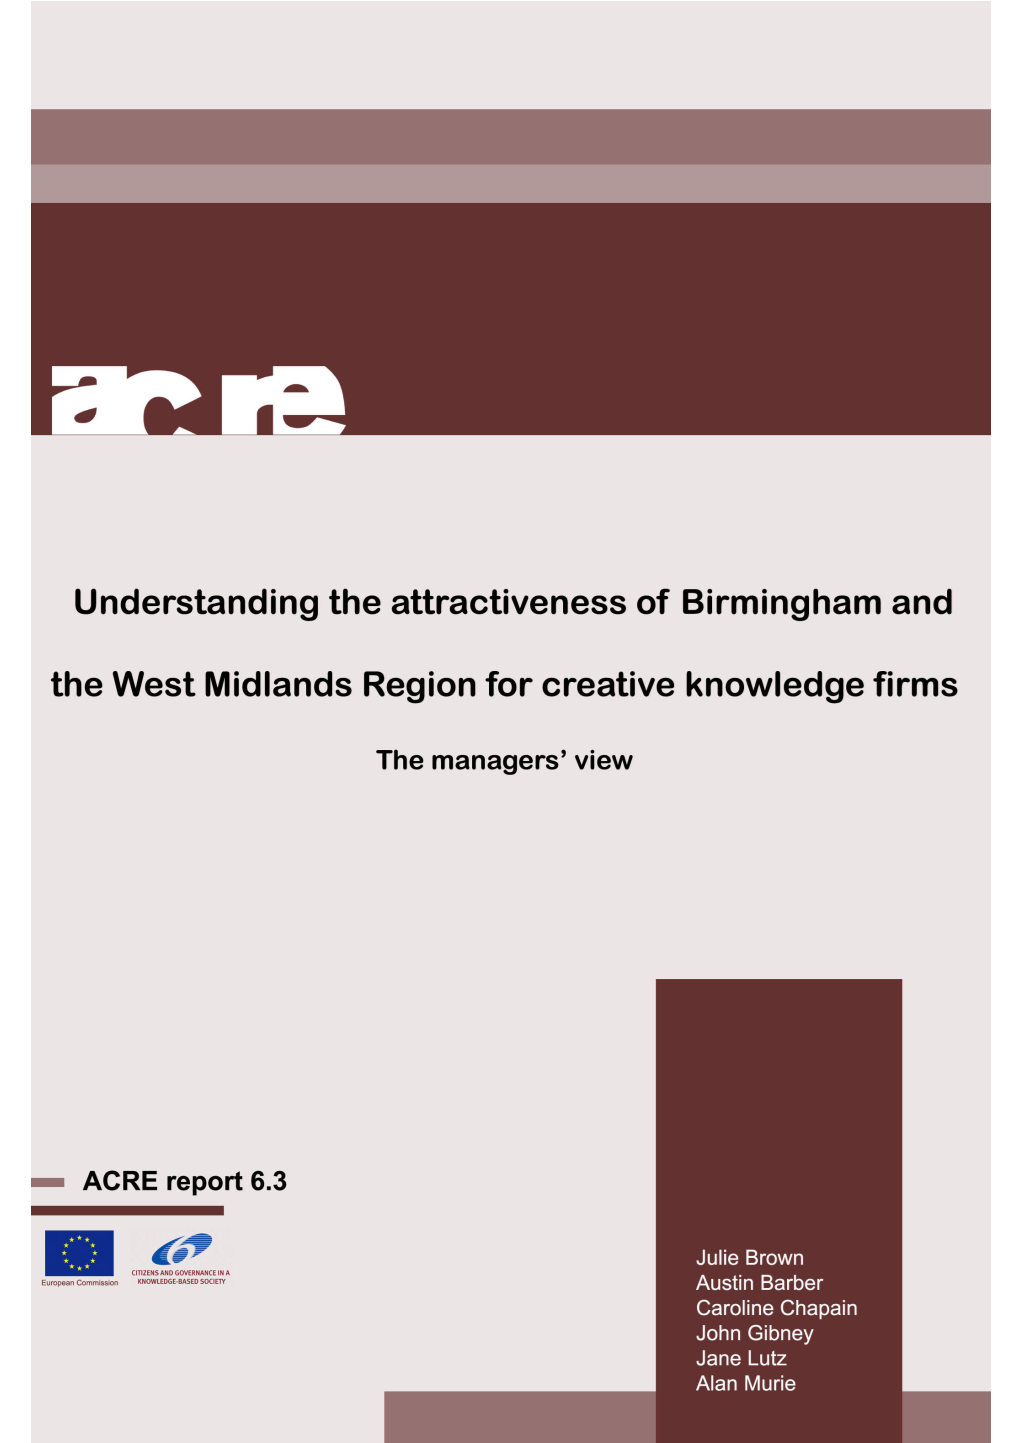 Understanding the Attractiveness of Birmingham and the West Midlands Region for Creative Knowledge Firms